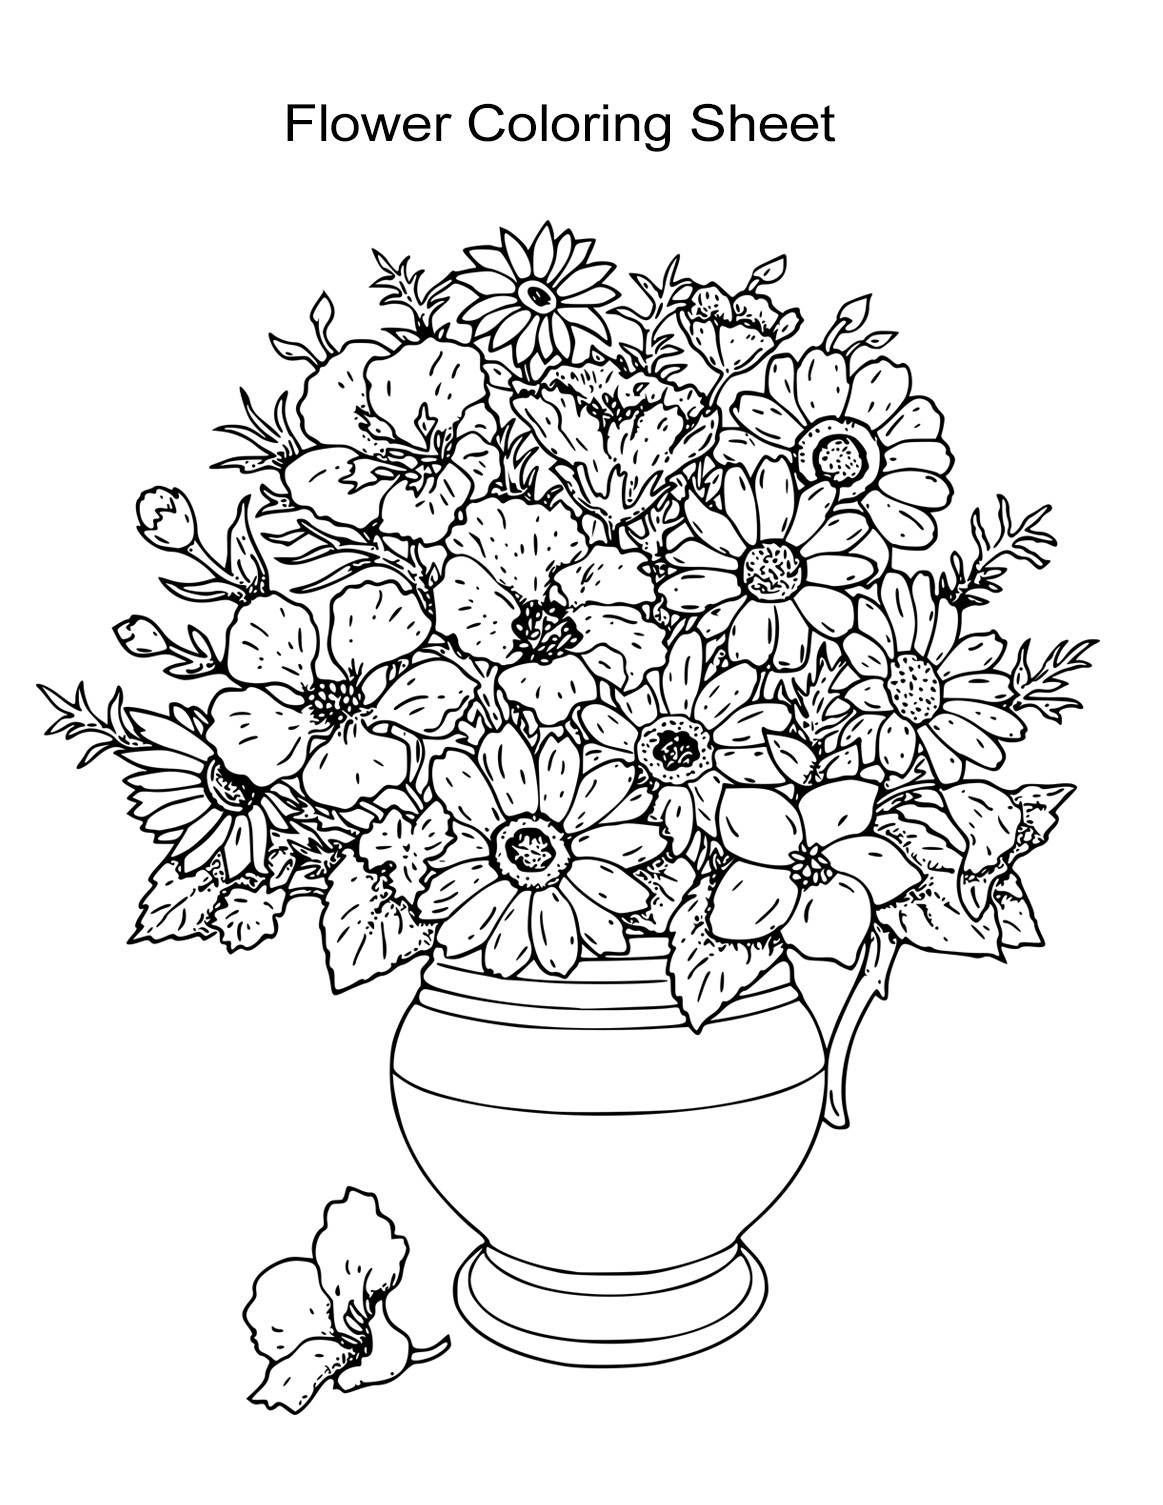 Free Coloring Pages For Girls Flowers
 10 Flower Coloring Sheets for Girls and Boys ALL ESL